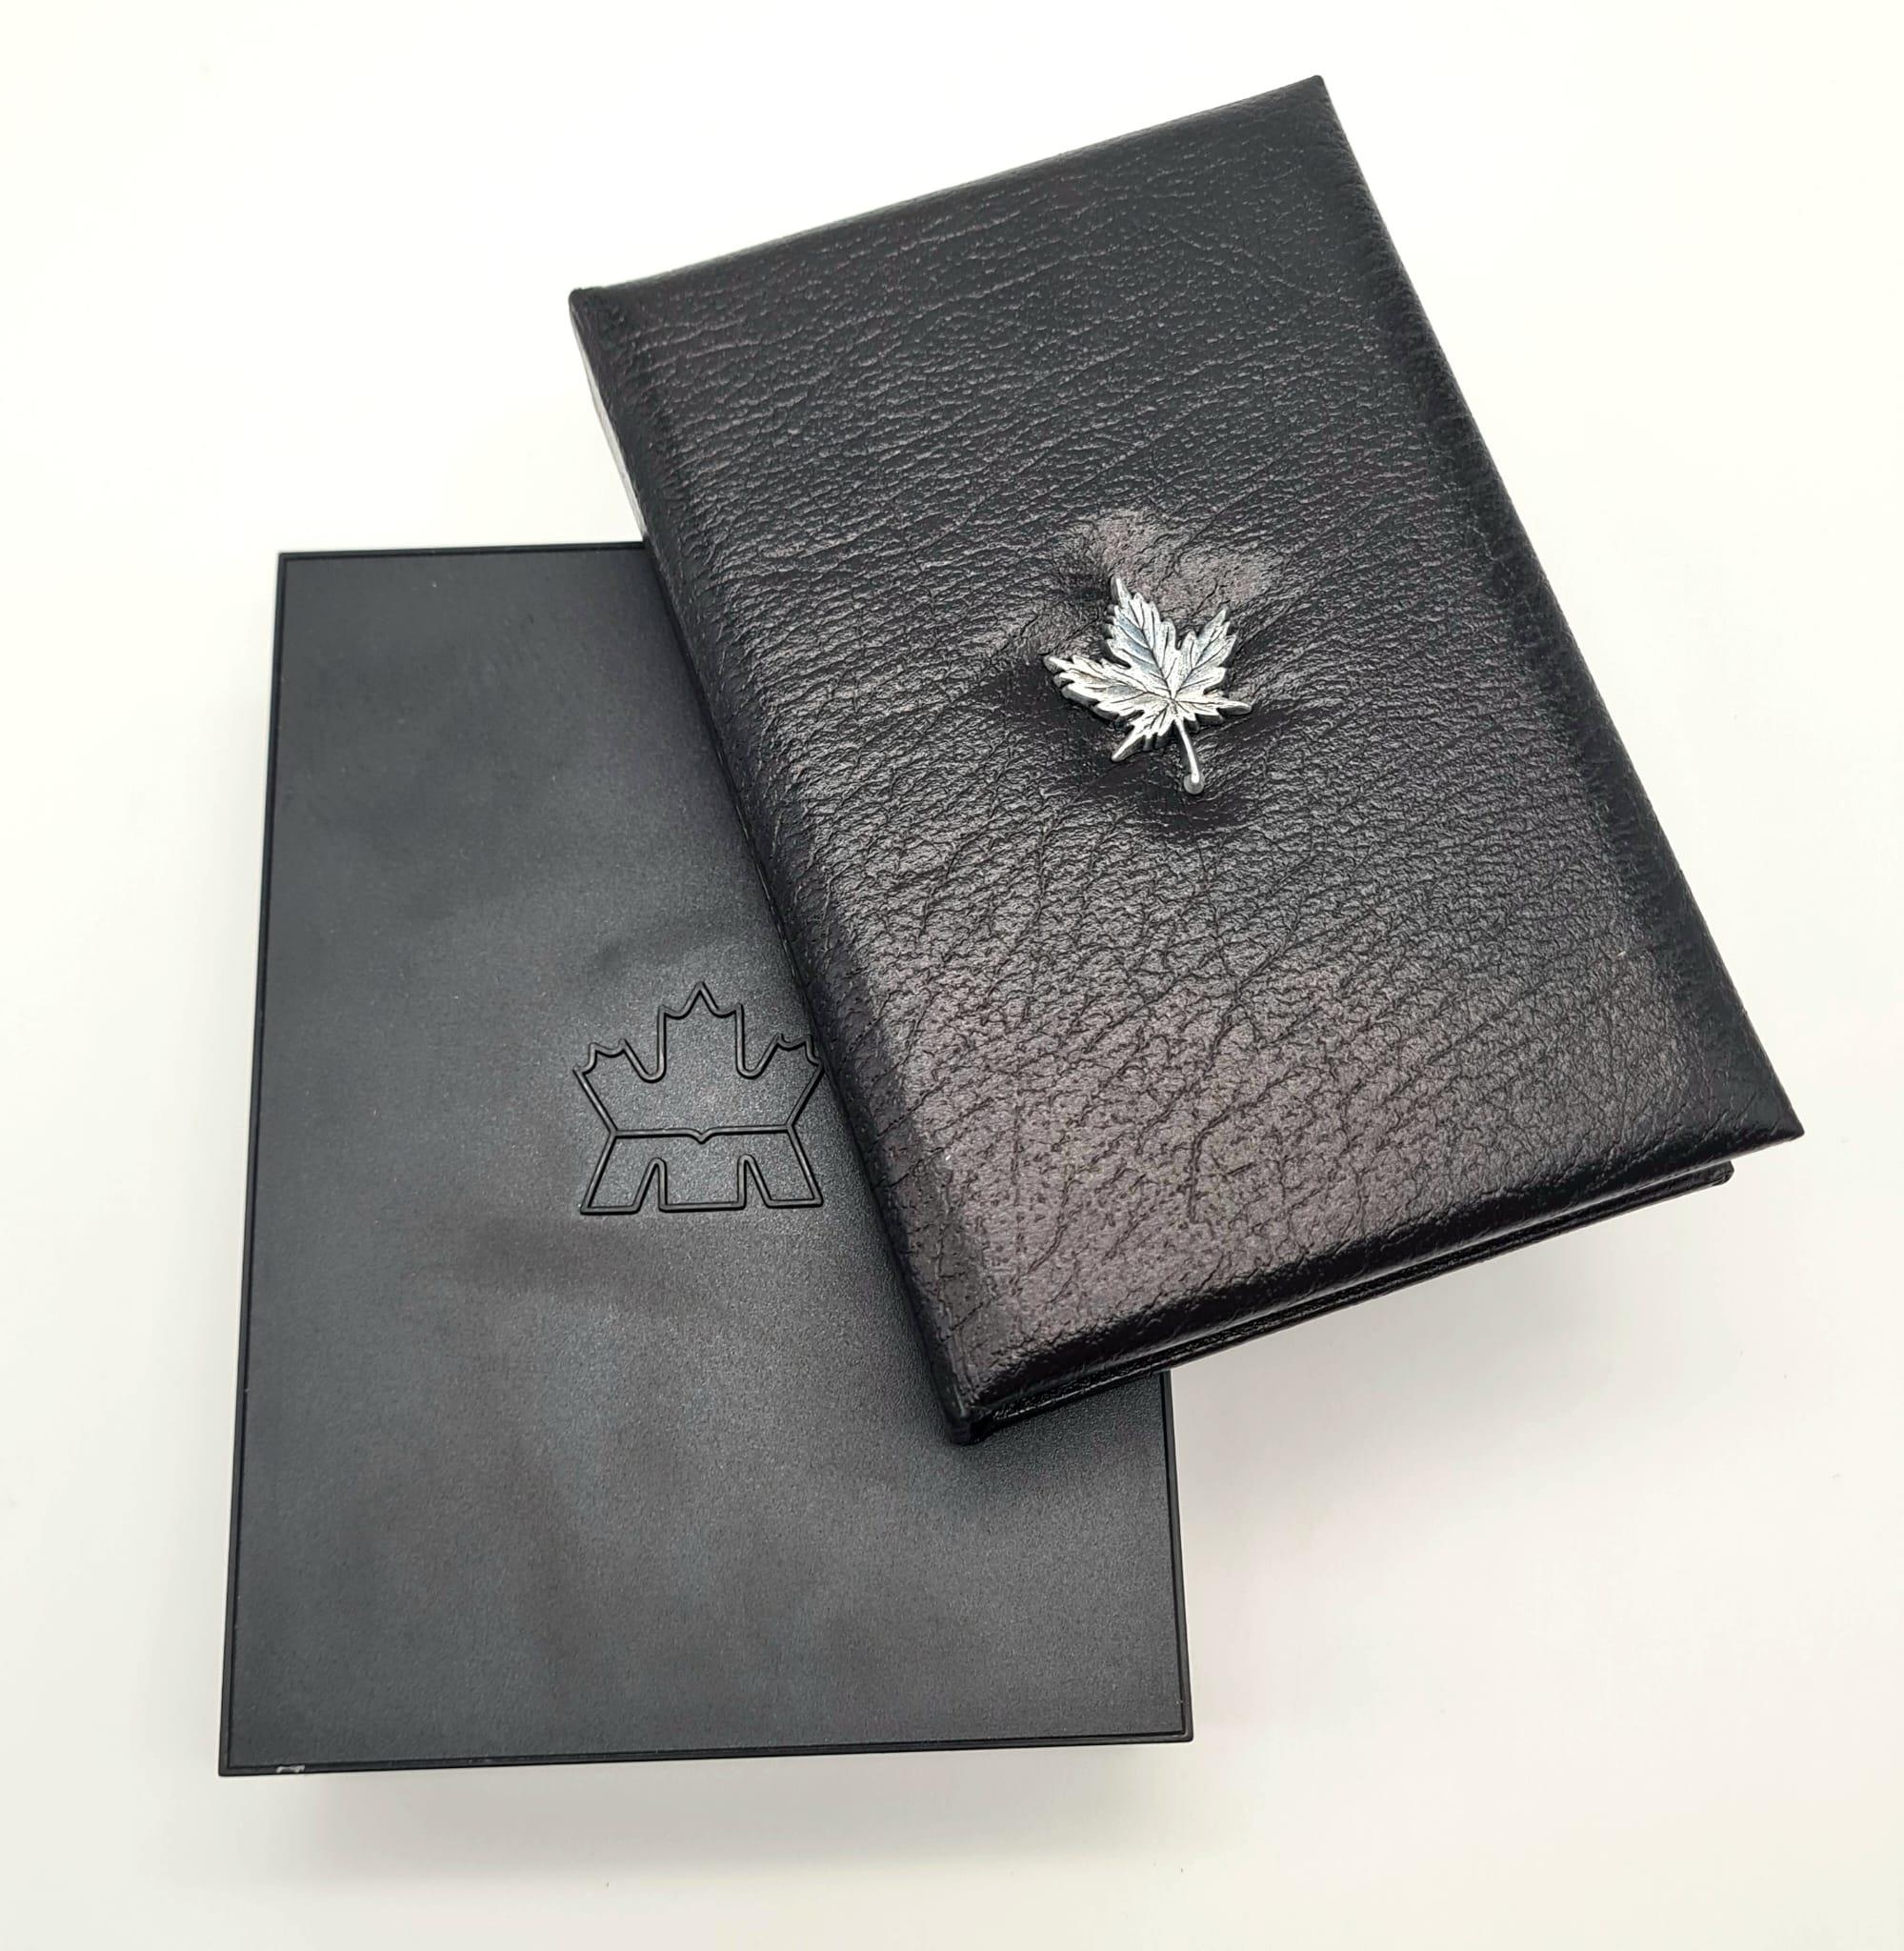 A 1996 Canadian Proof Coin Set. From the Royal Canadian Mint this is the only set available that